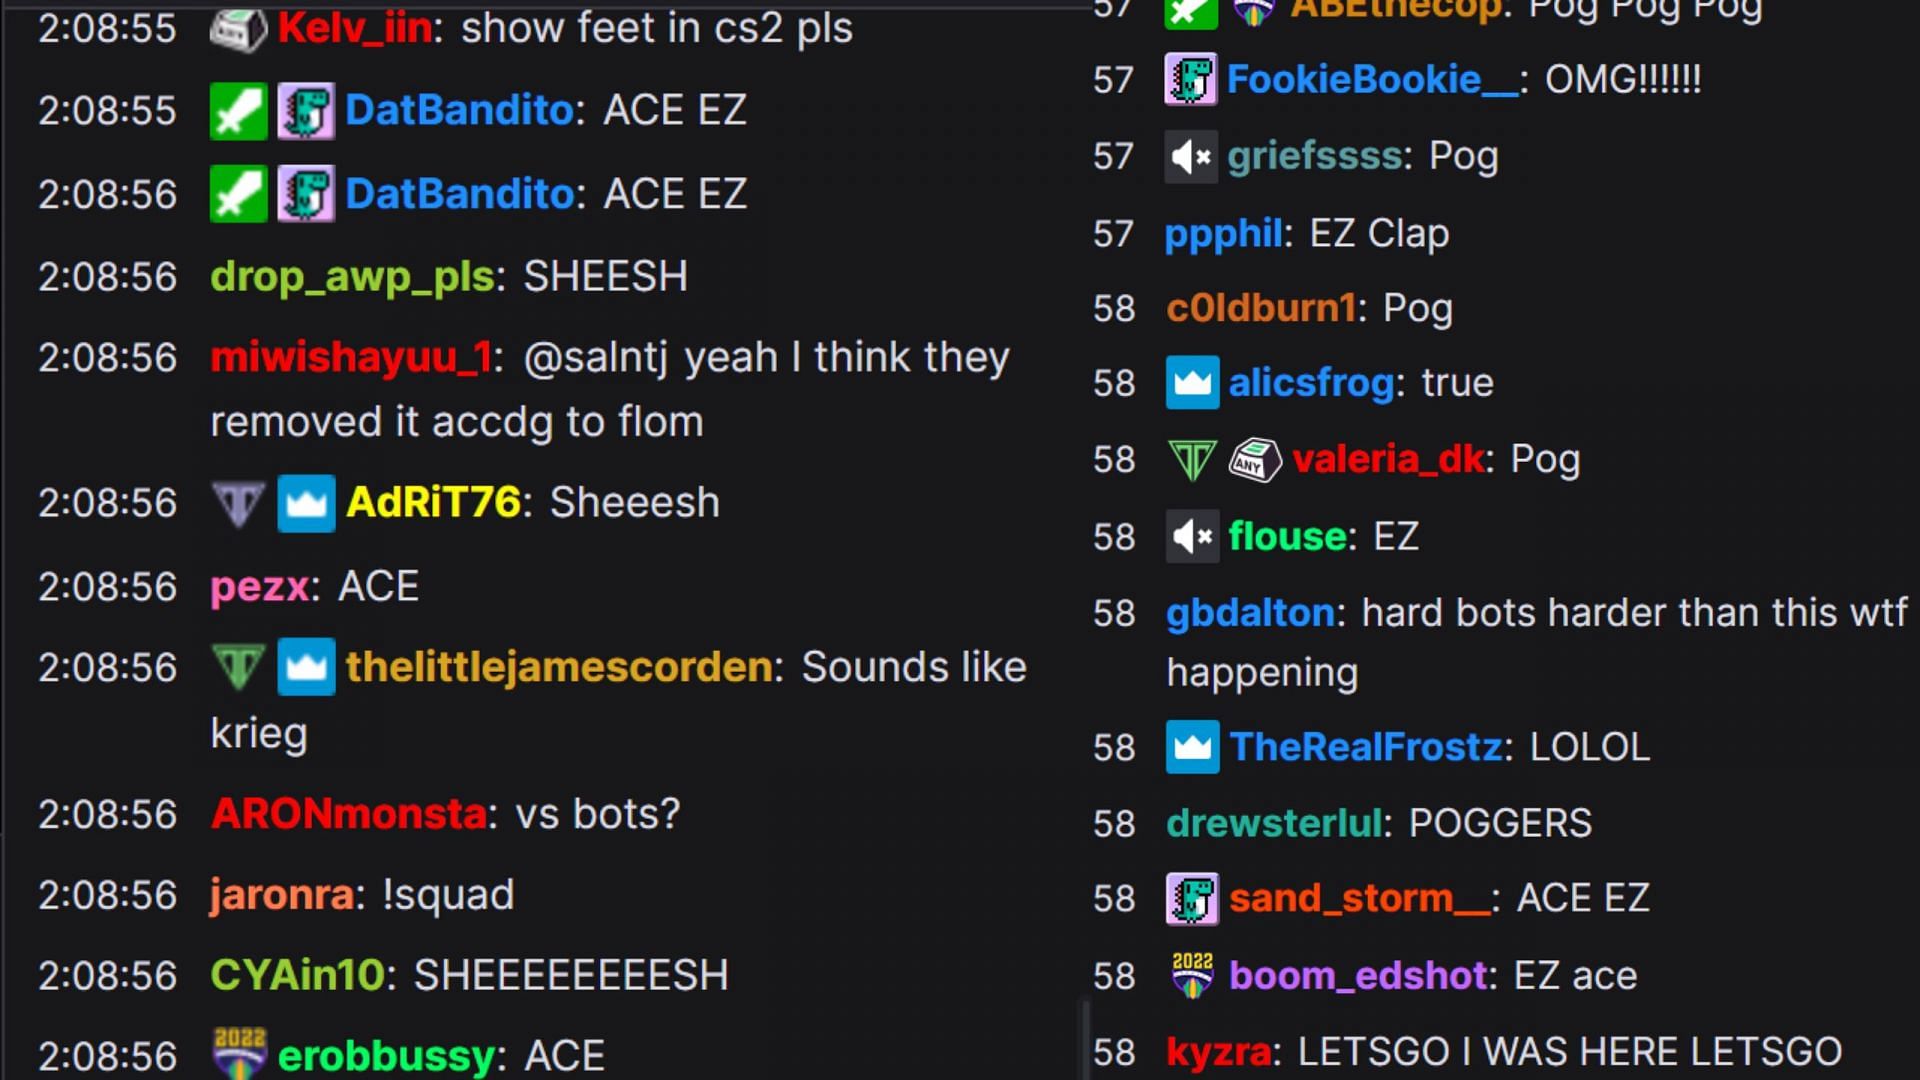 Twitch chat reacts to the ace (Image - Twitch)